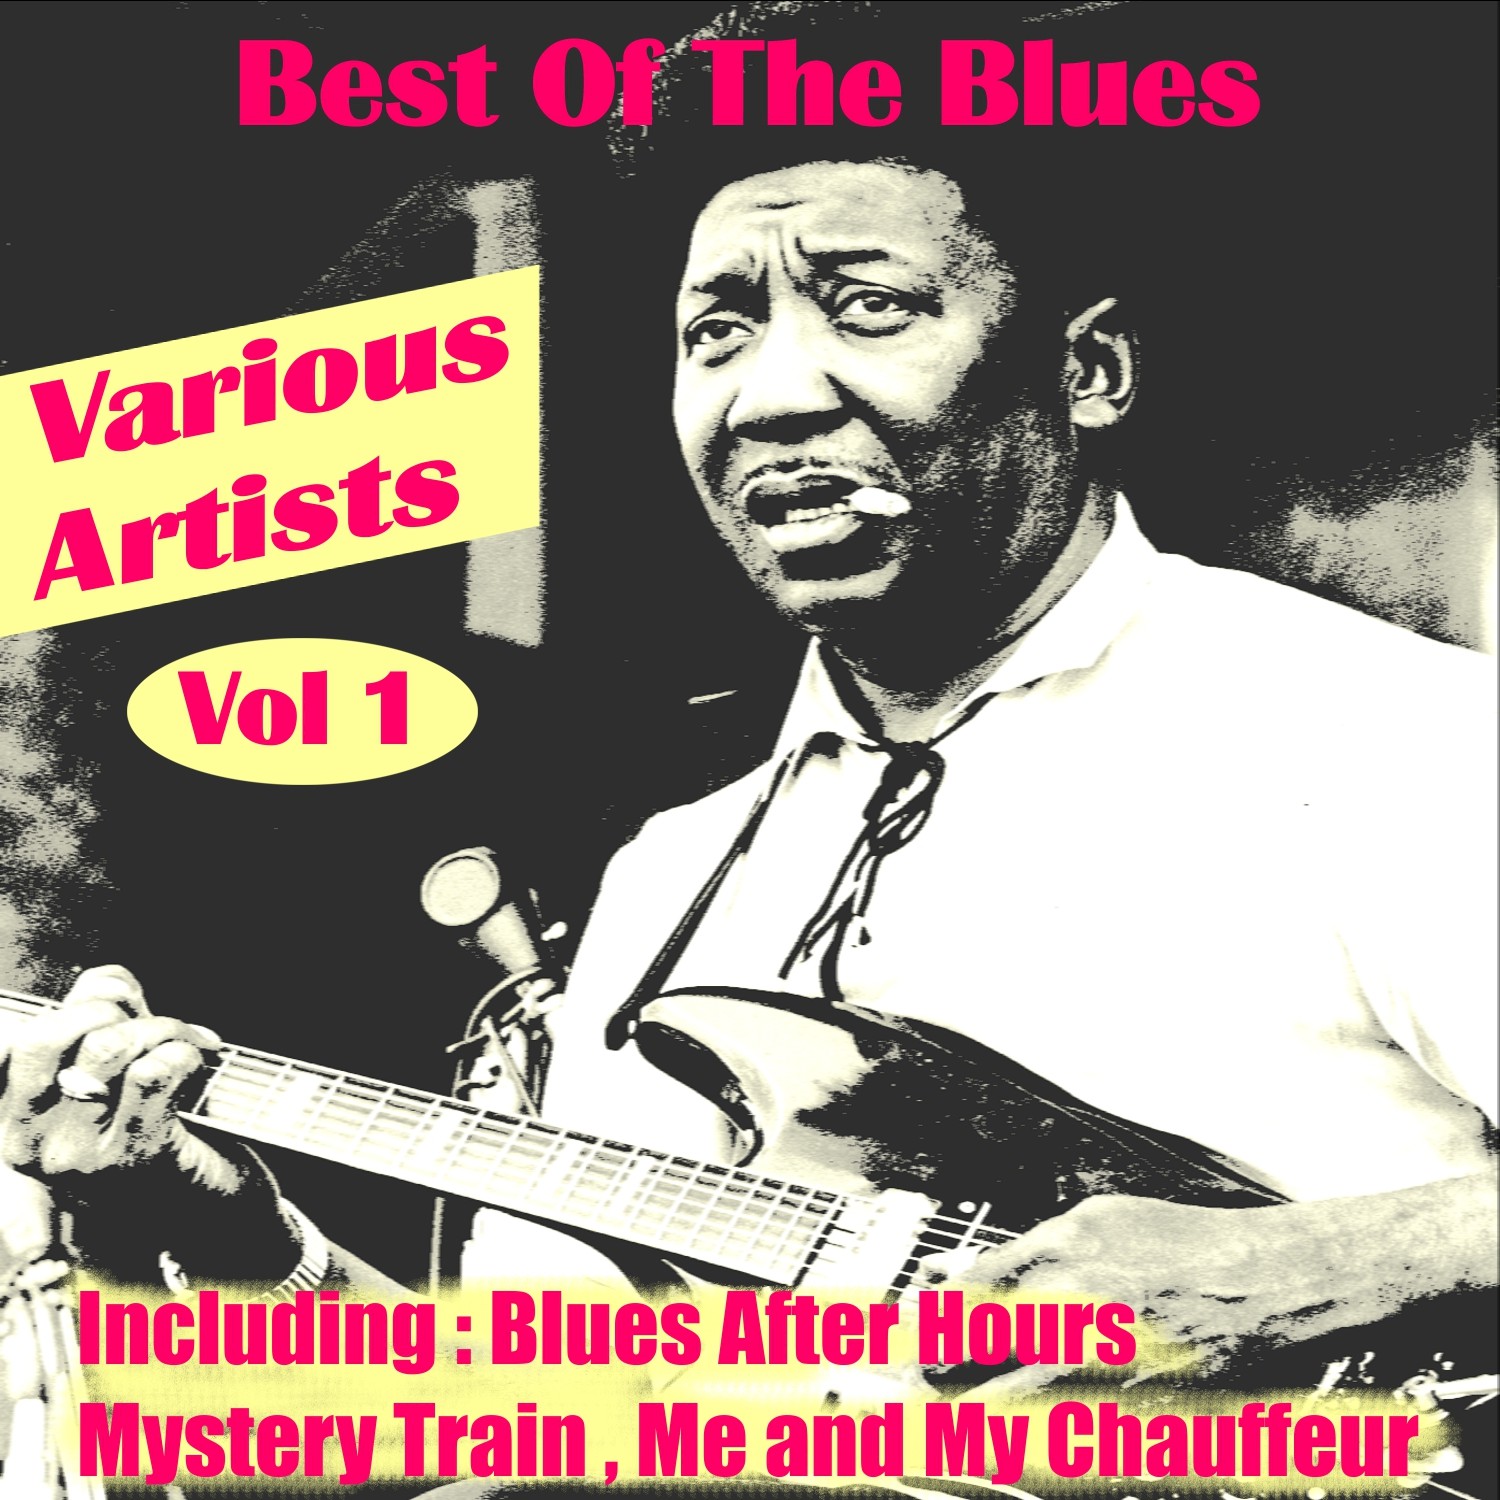 Best of the Blues, Vol. 1